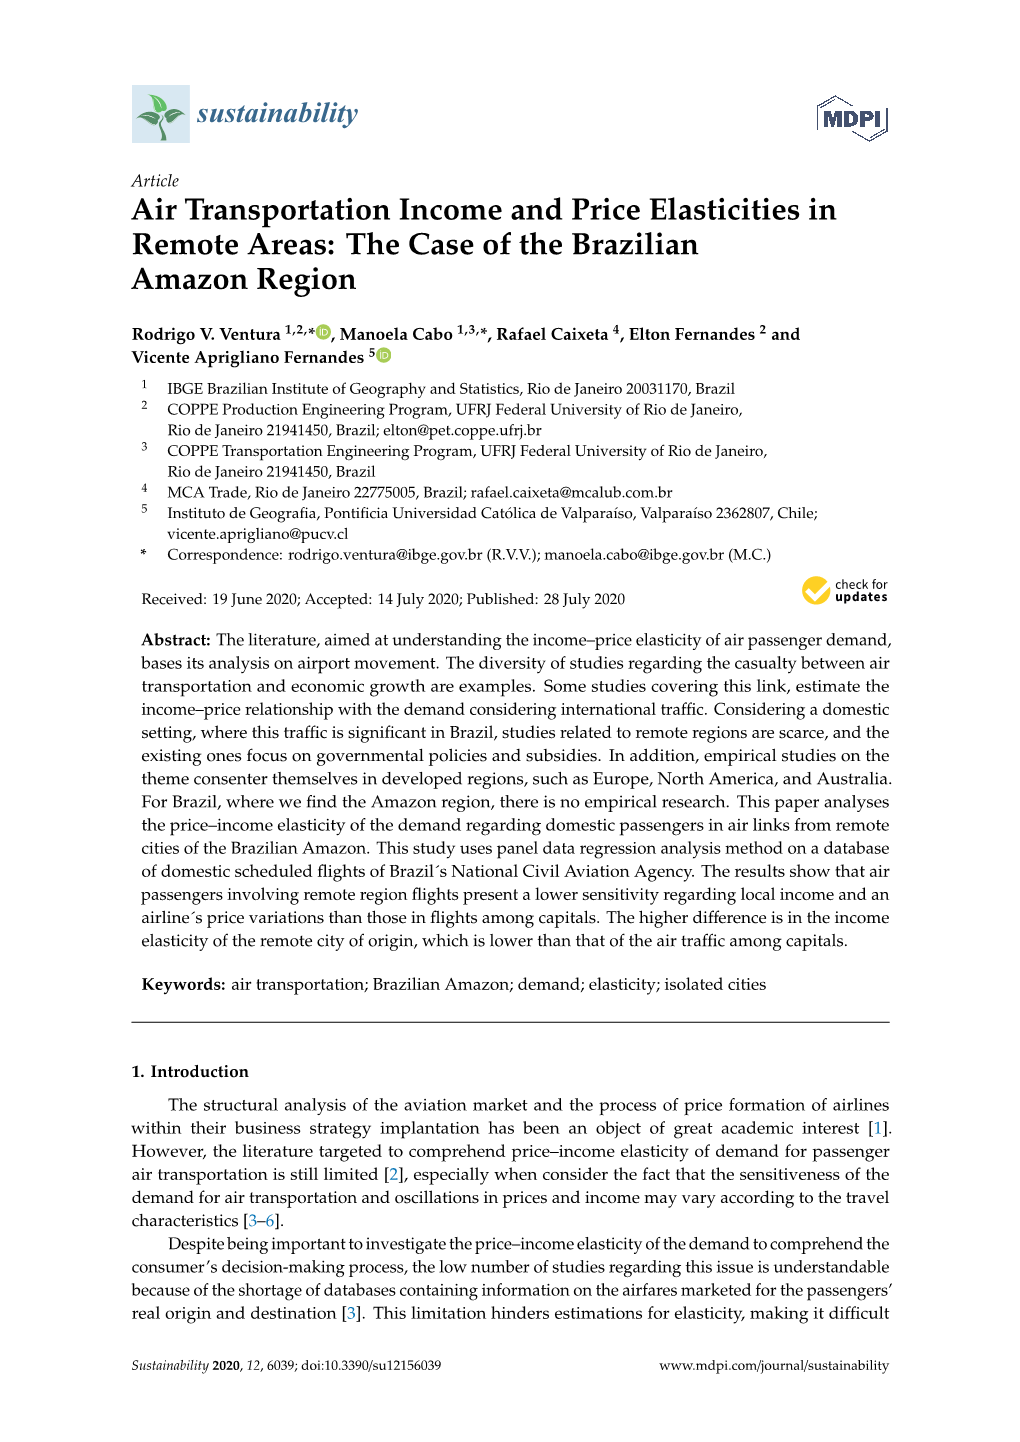 Air Transportation Income and Price Elasticities in Remote Areas: the Case of the Brazilian Amazon Region